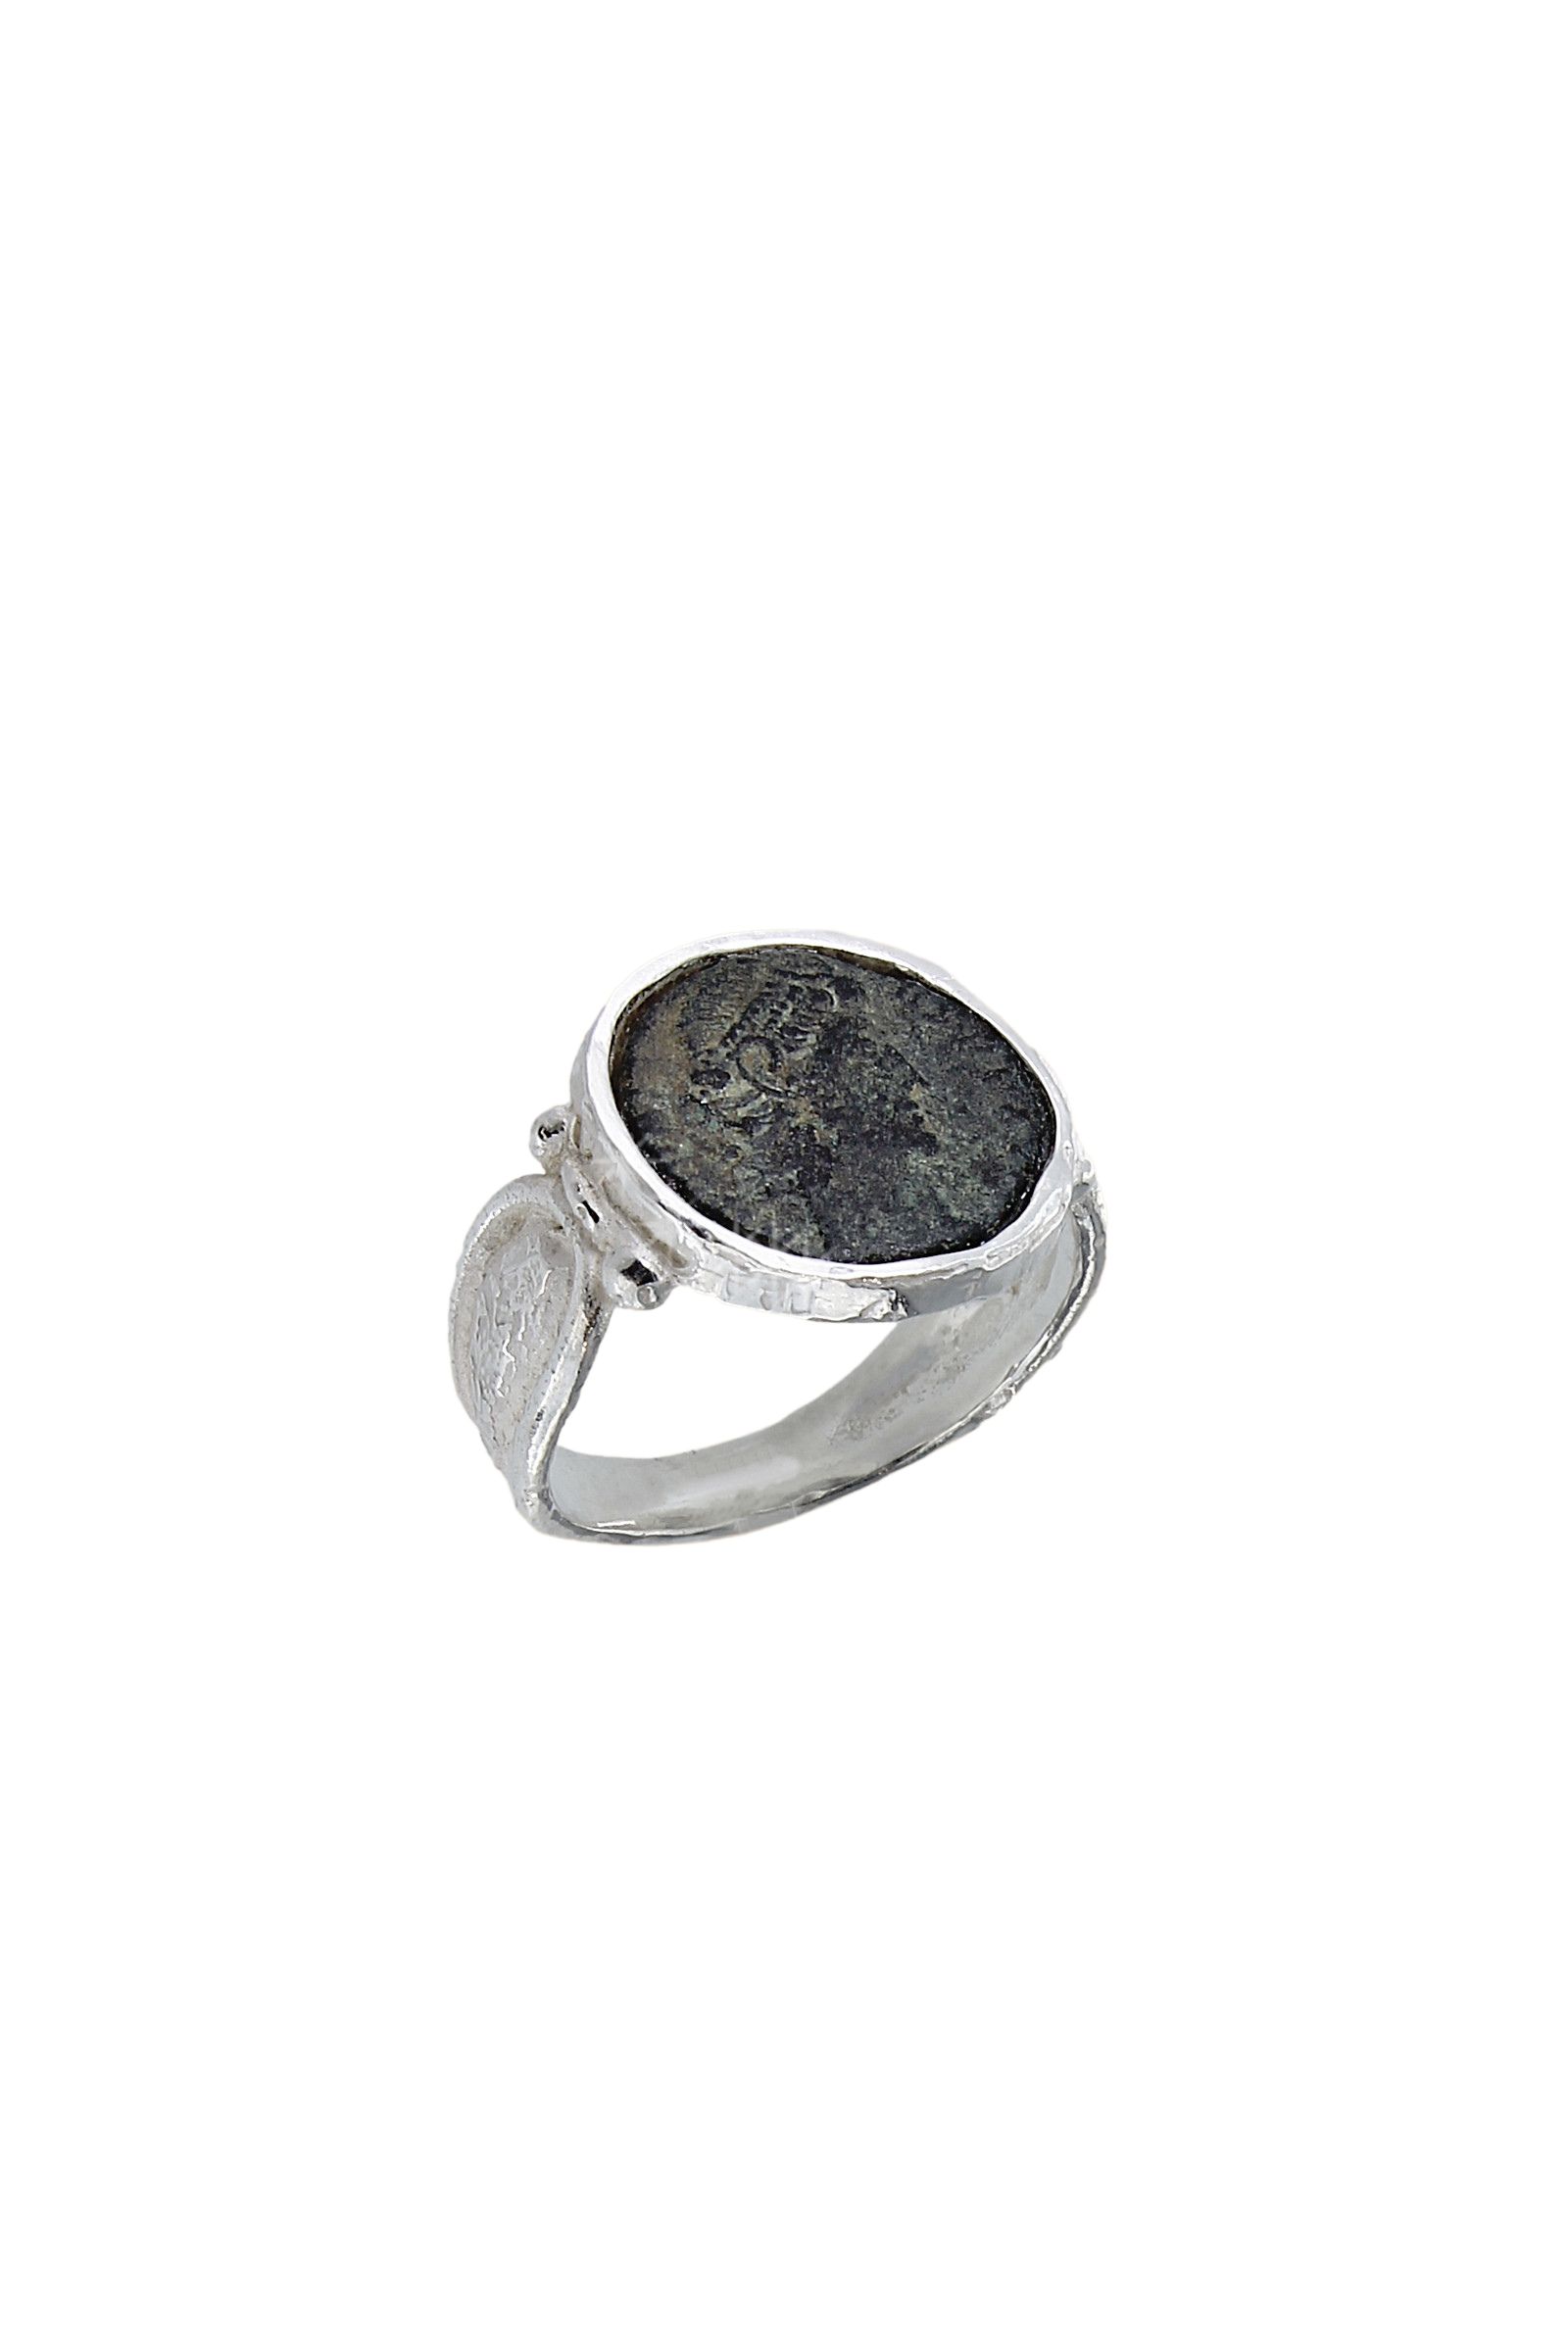 AE667-Sterling-Silver-925-Roman-Coin-Ring-1_